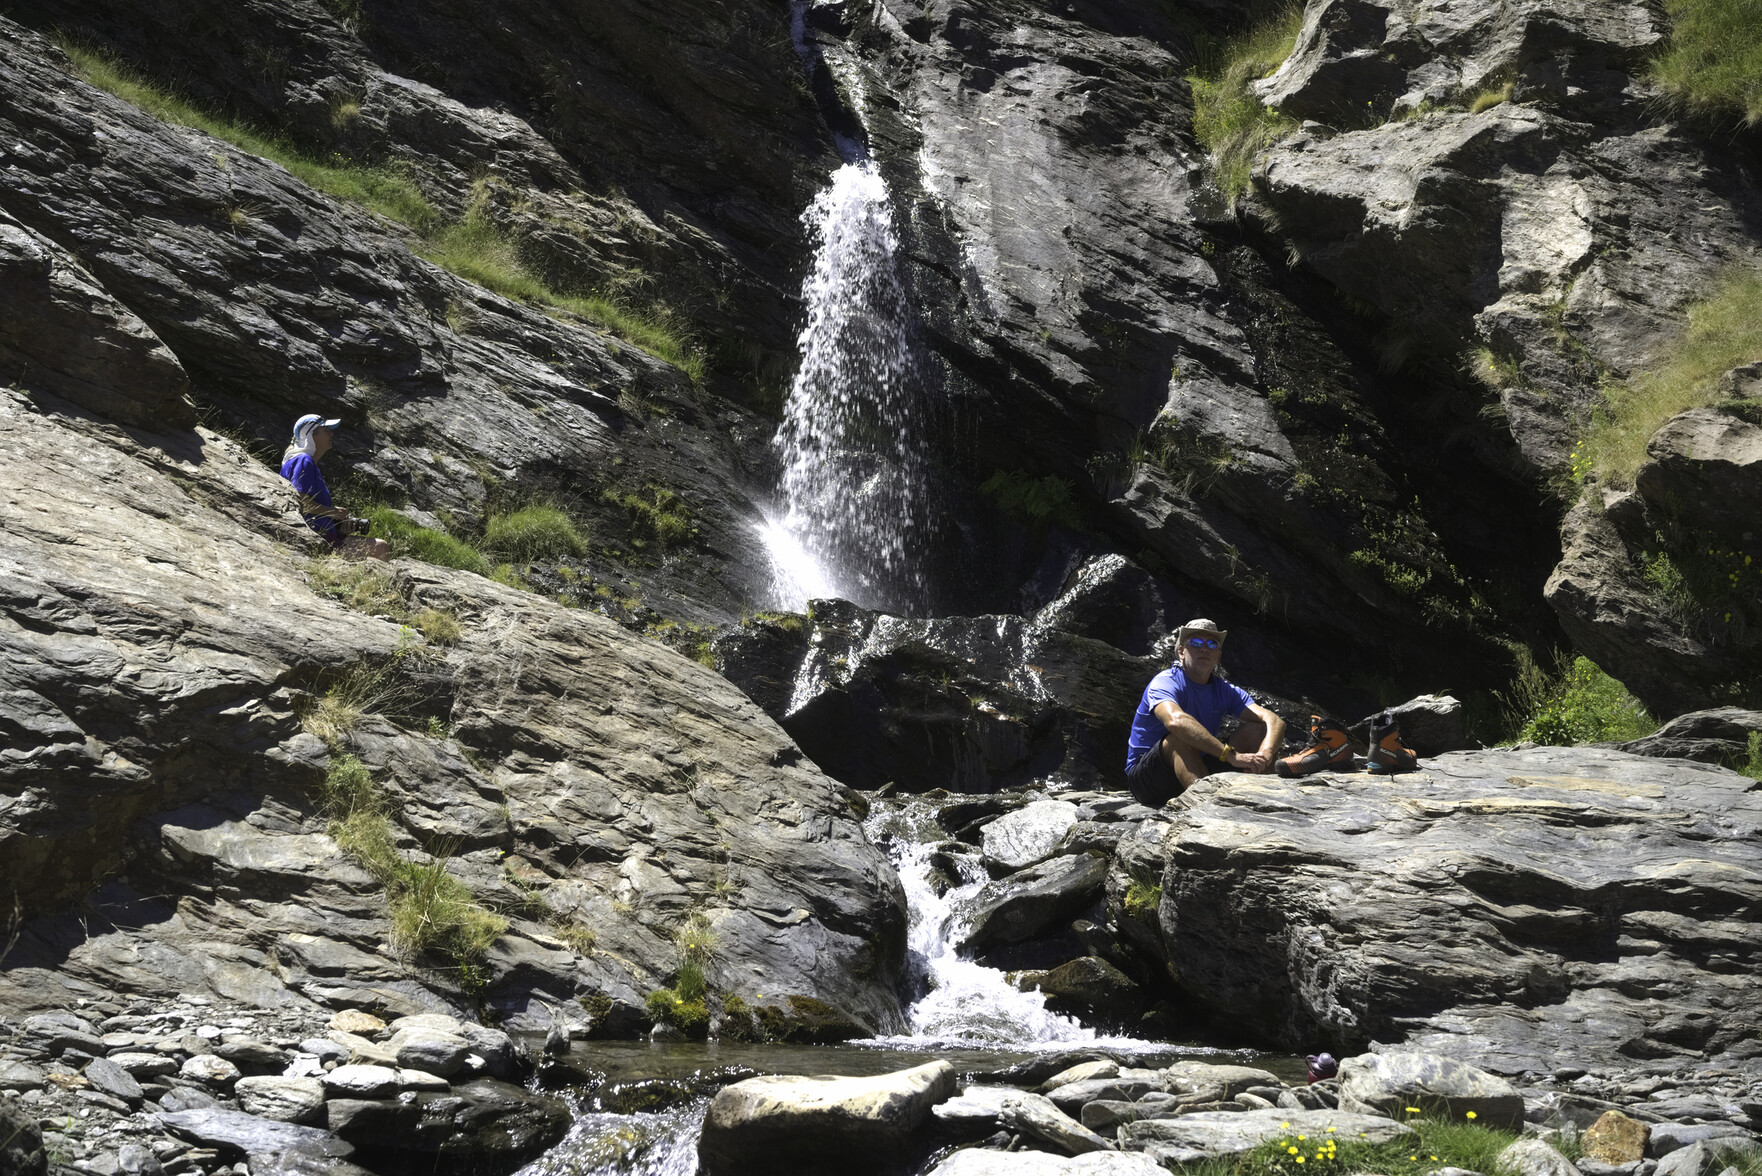 Some hikers relax by a waterfall